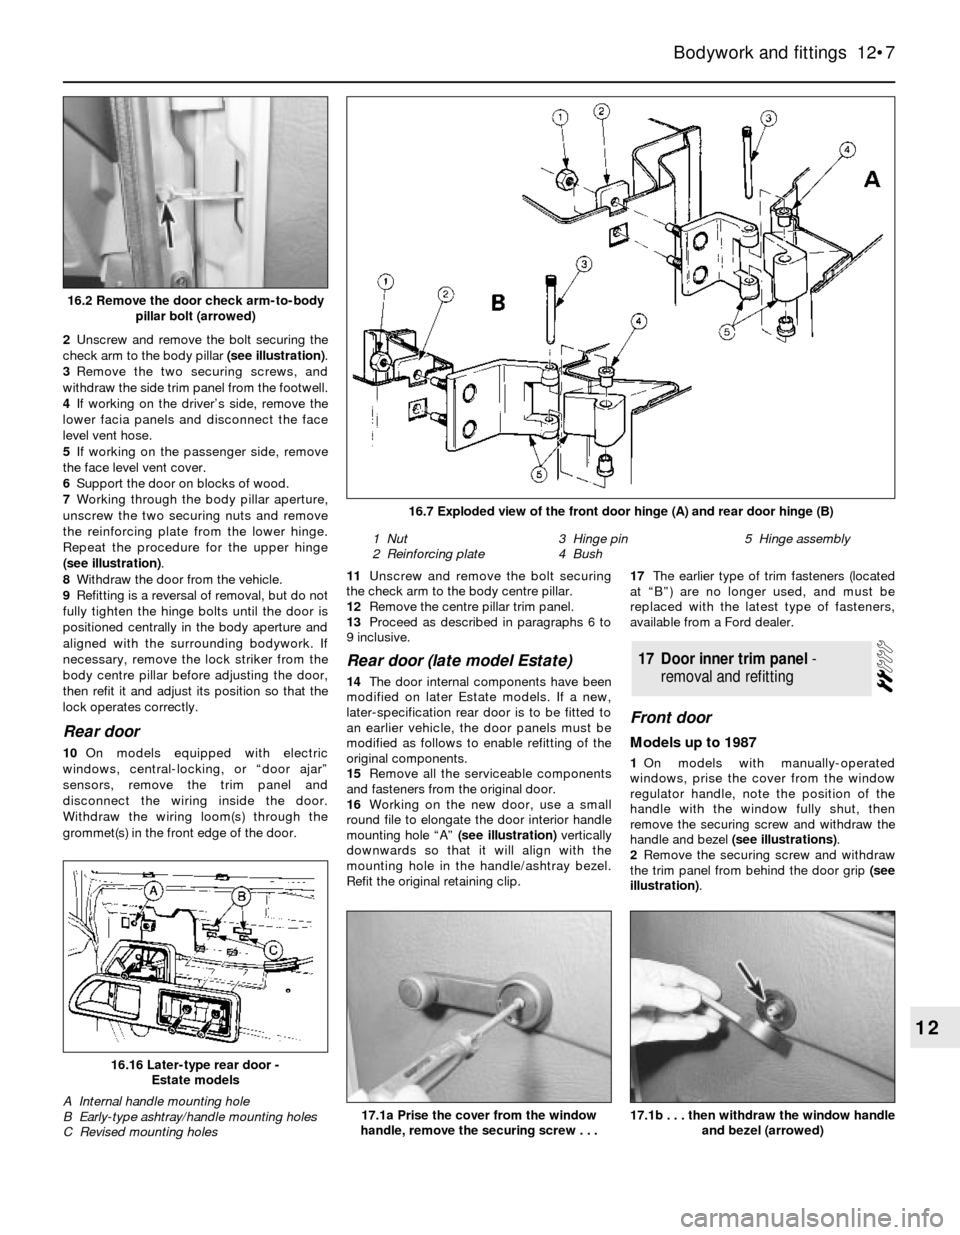 FORD SIERRA 1982 1.G Bodywork And Fittings Workshop Manual 2Unscrew and remove the bolt securing the
check arm to the body pillar (see illustration). 
3Remove the two securing screws, and
withdraw the side trim panel from the footwell. 
4If working on the dri